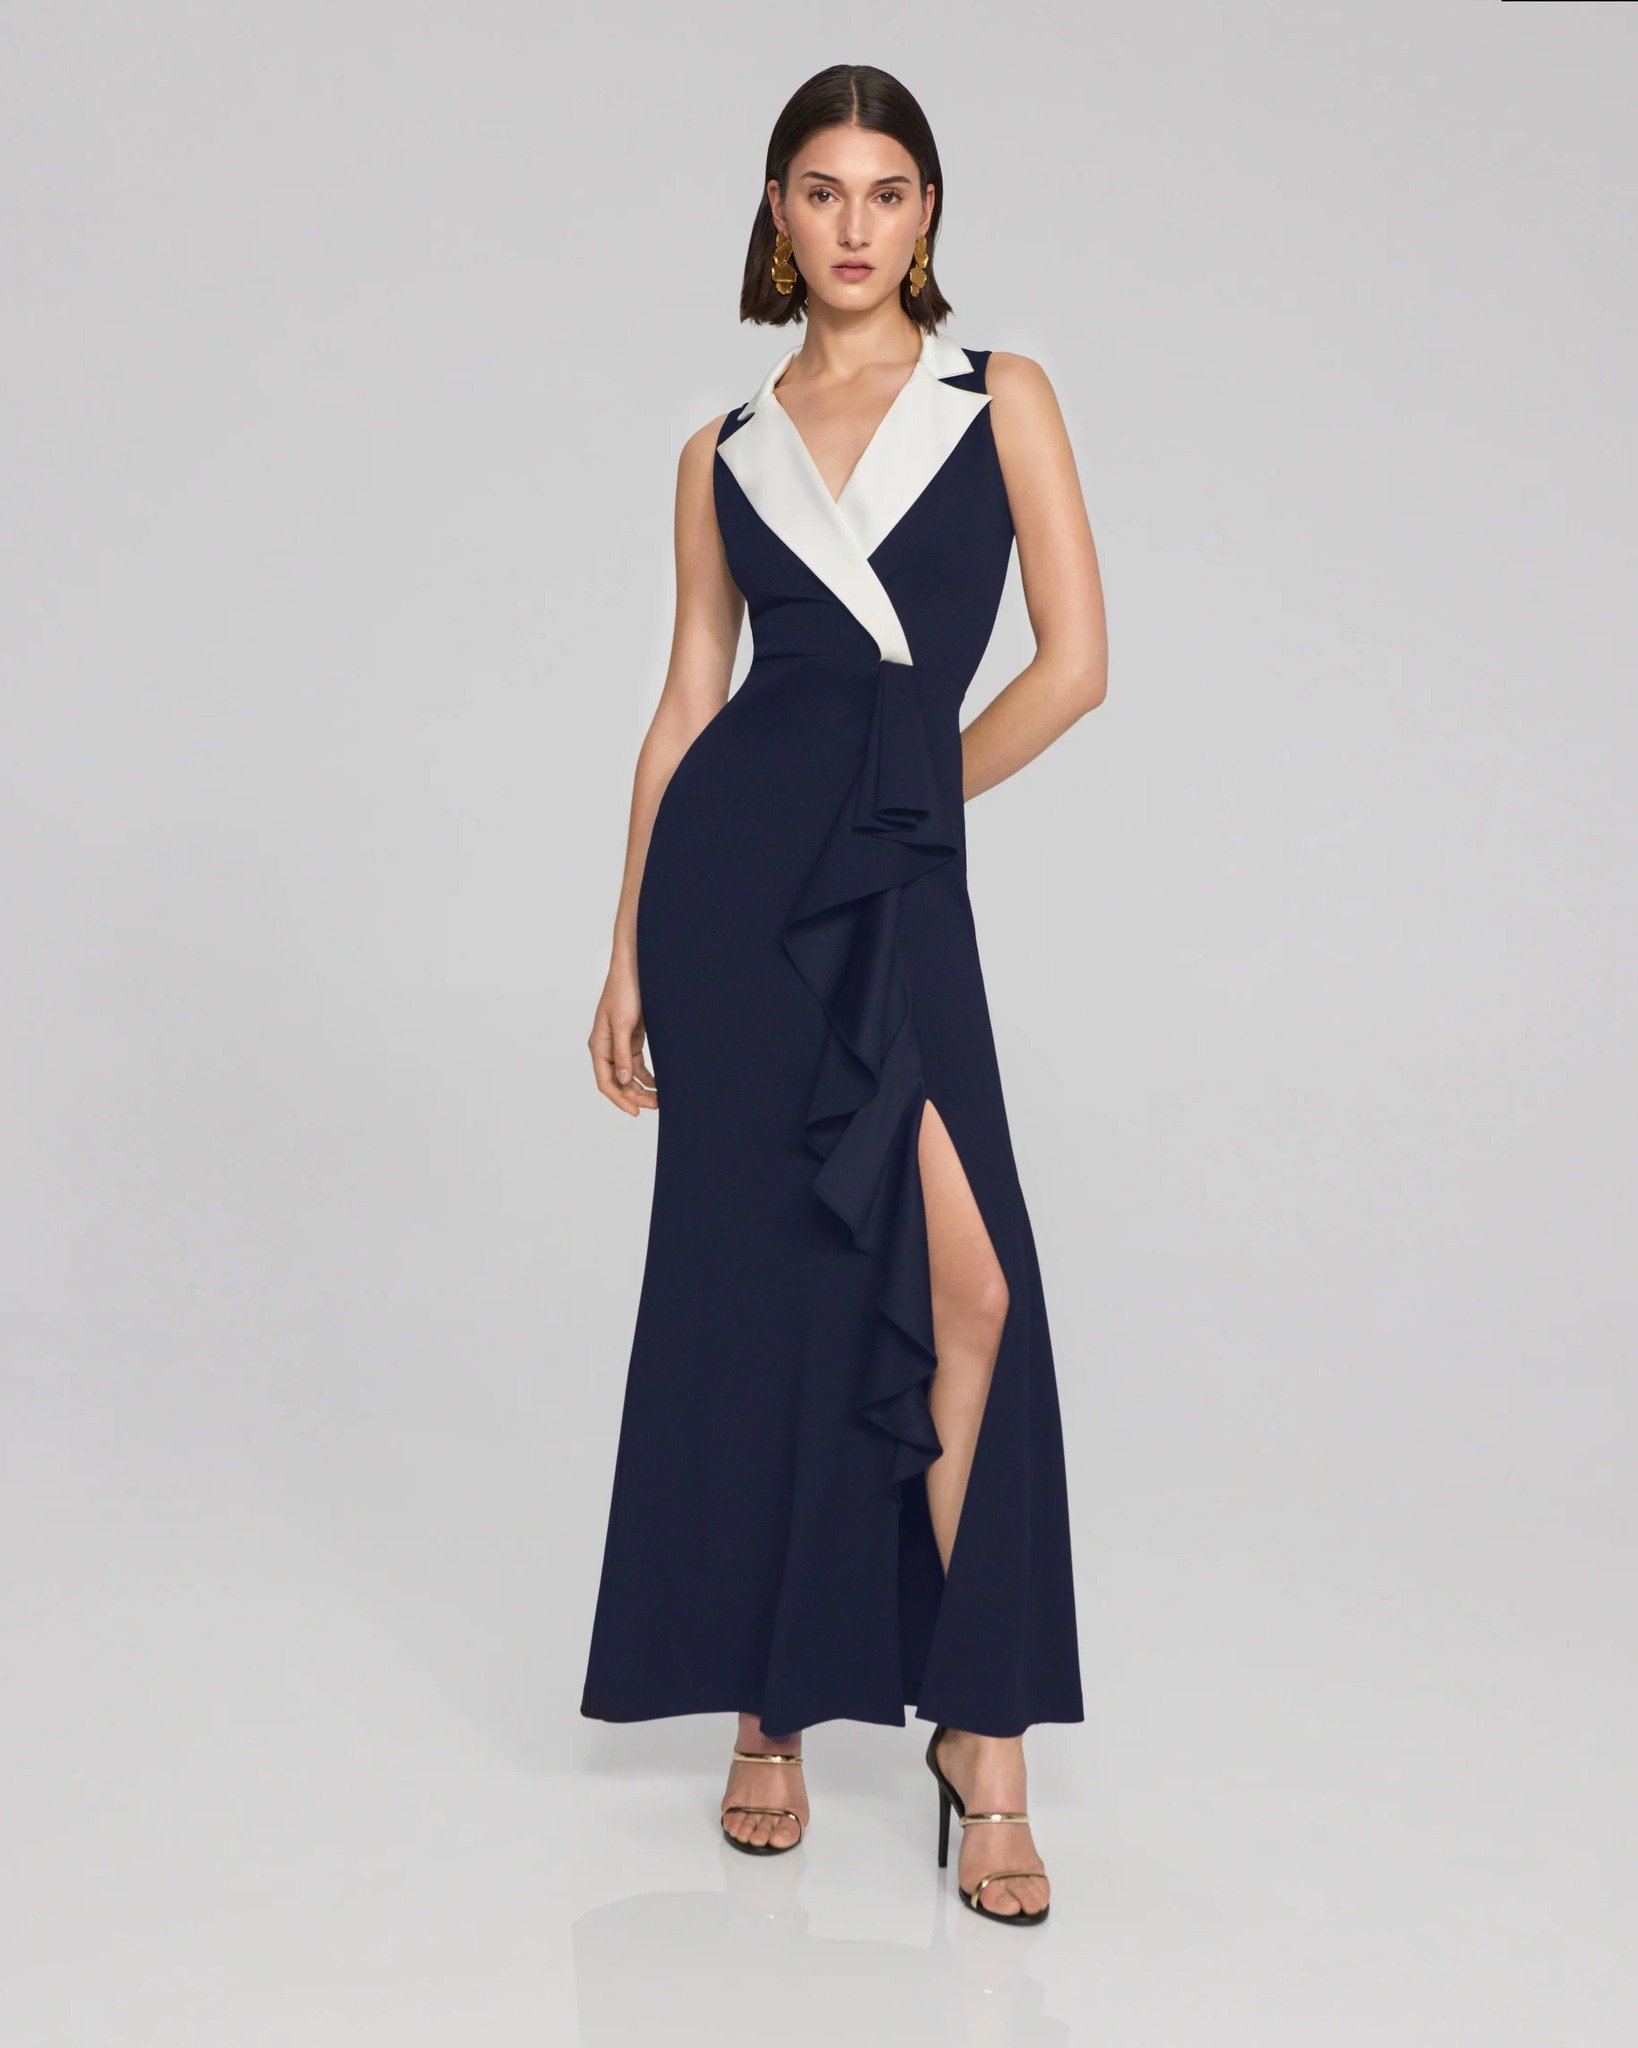 Step into the spotlight with this solid scuba crepe tuxedo-style gown. This stunning trumpet maxi dress features a notched collar in a contrasting colour for a touch of contemporary flair. The front ruffle and left-side slit add a playful yet elegant